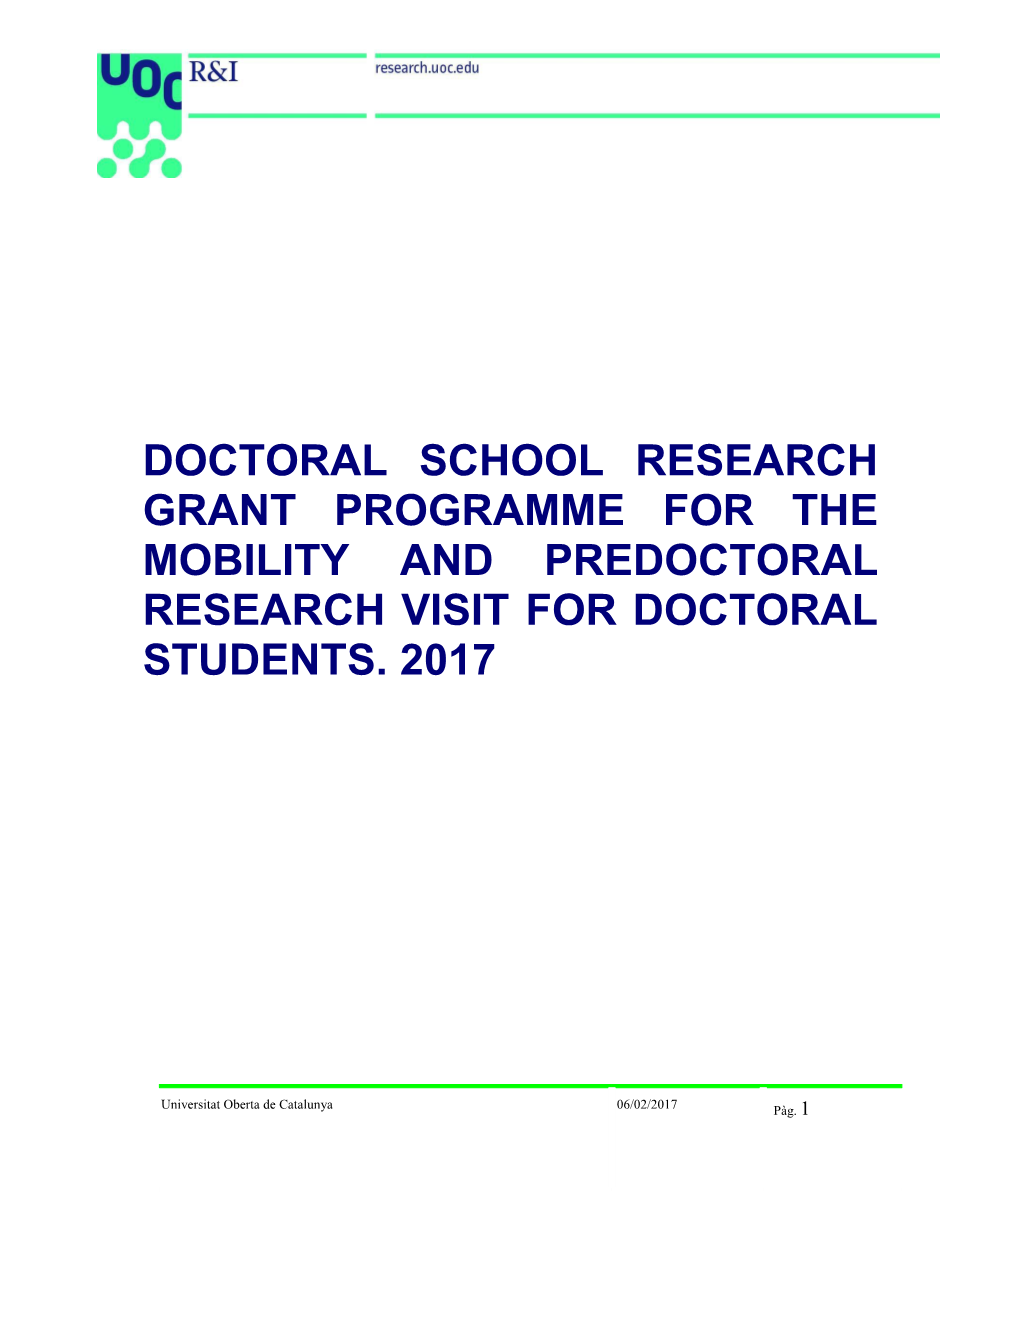 A) Details Relating to the Applicant for Grant